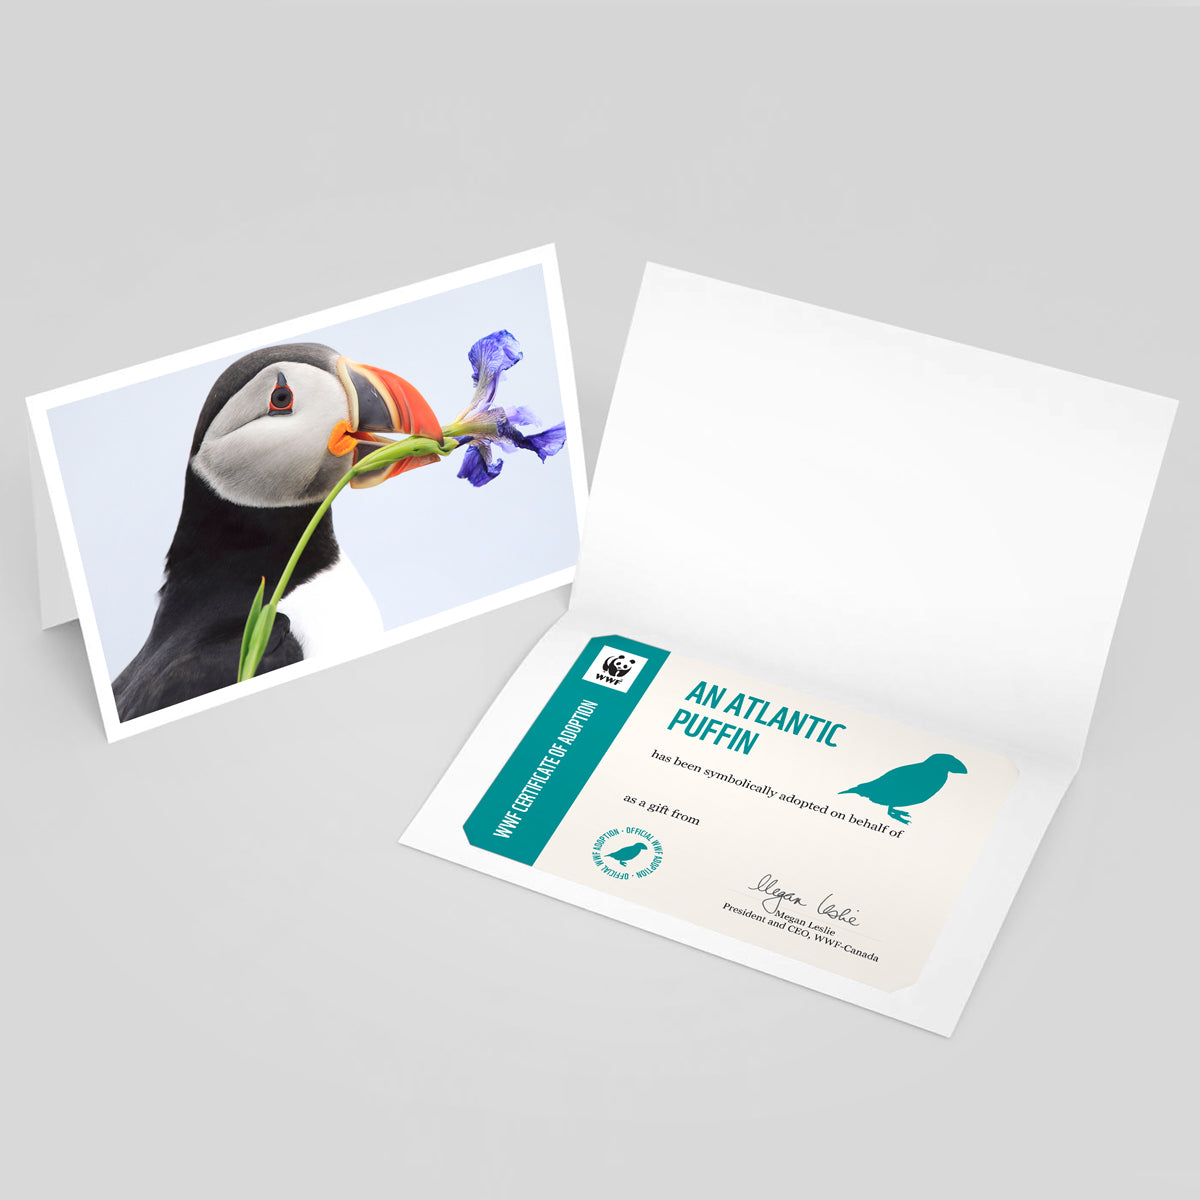 An image of a folded card with a photo of an Atlantic puffin on the front. Beside it is an image of an Atlantic puffin adoption certificate